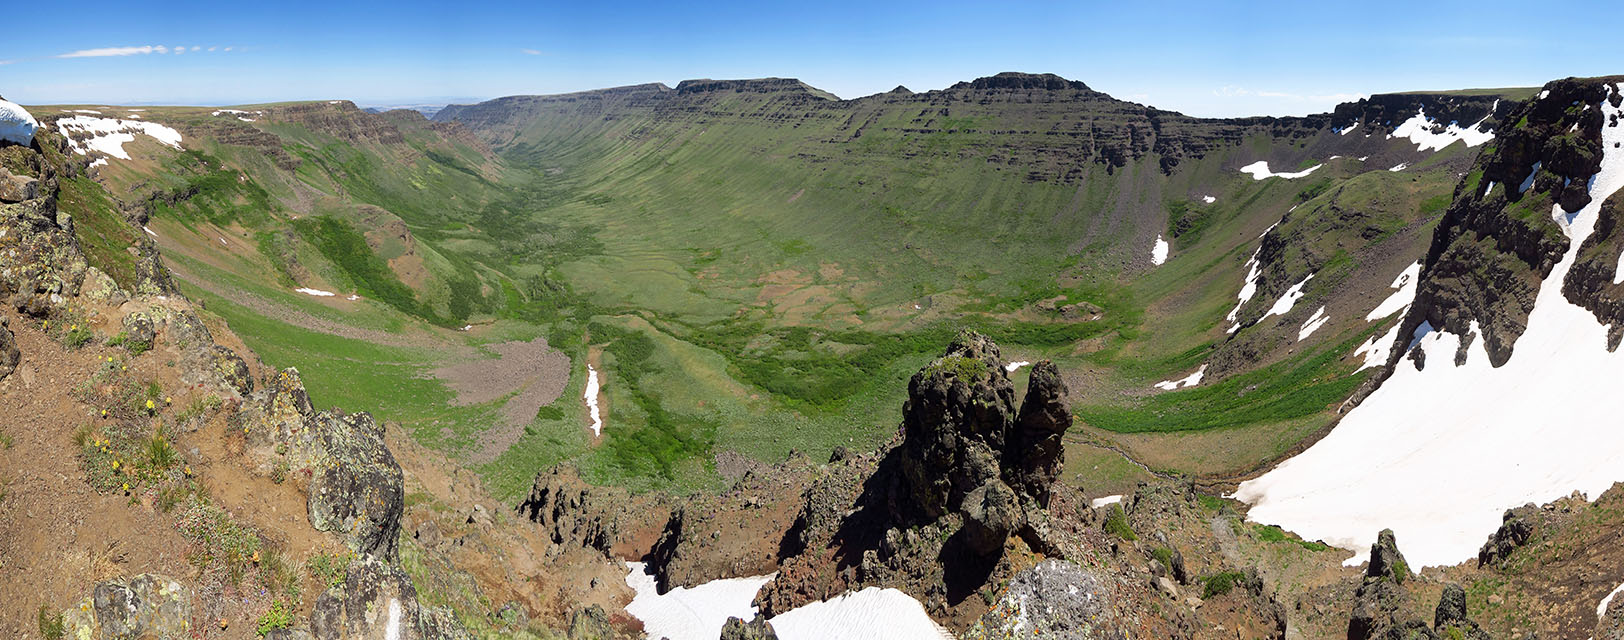 Kiger Gorge panorama [Kiger Gorge Overlook, Steens Mountain, Harney County, Oregon]